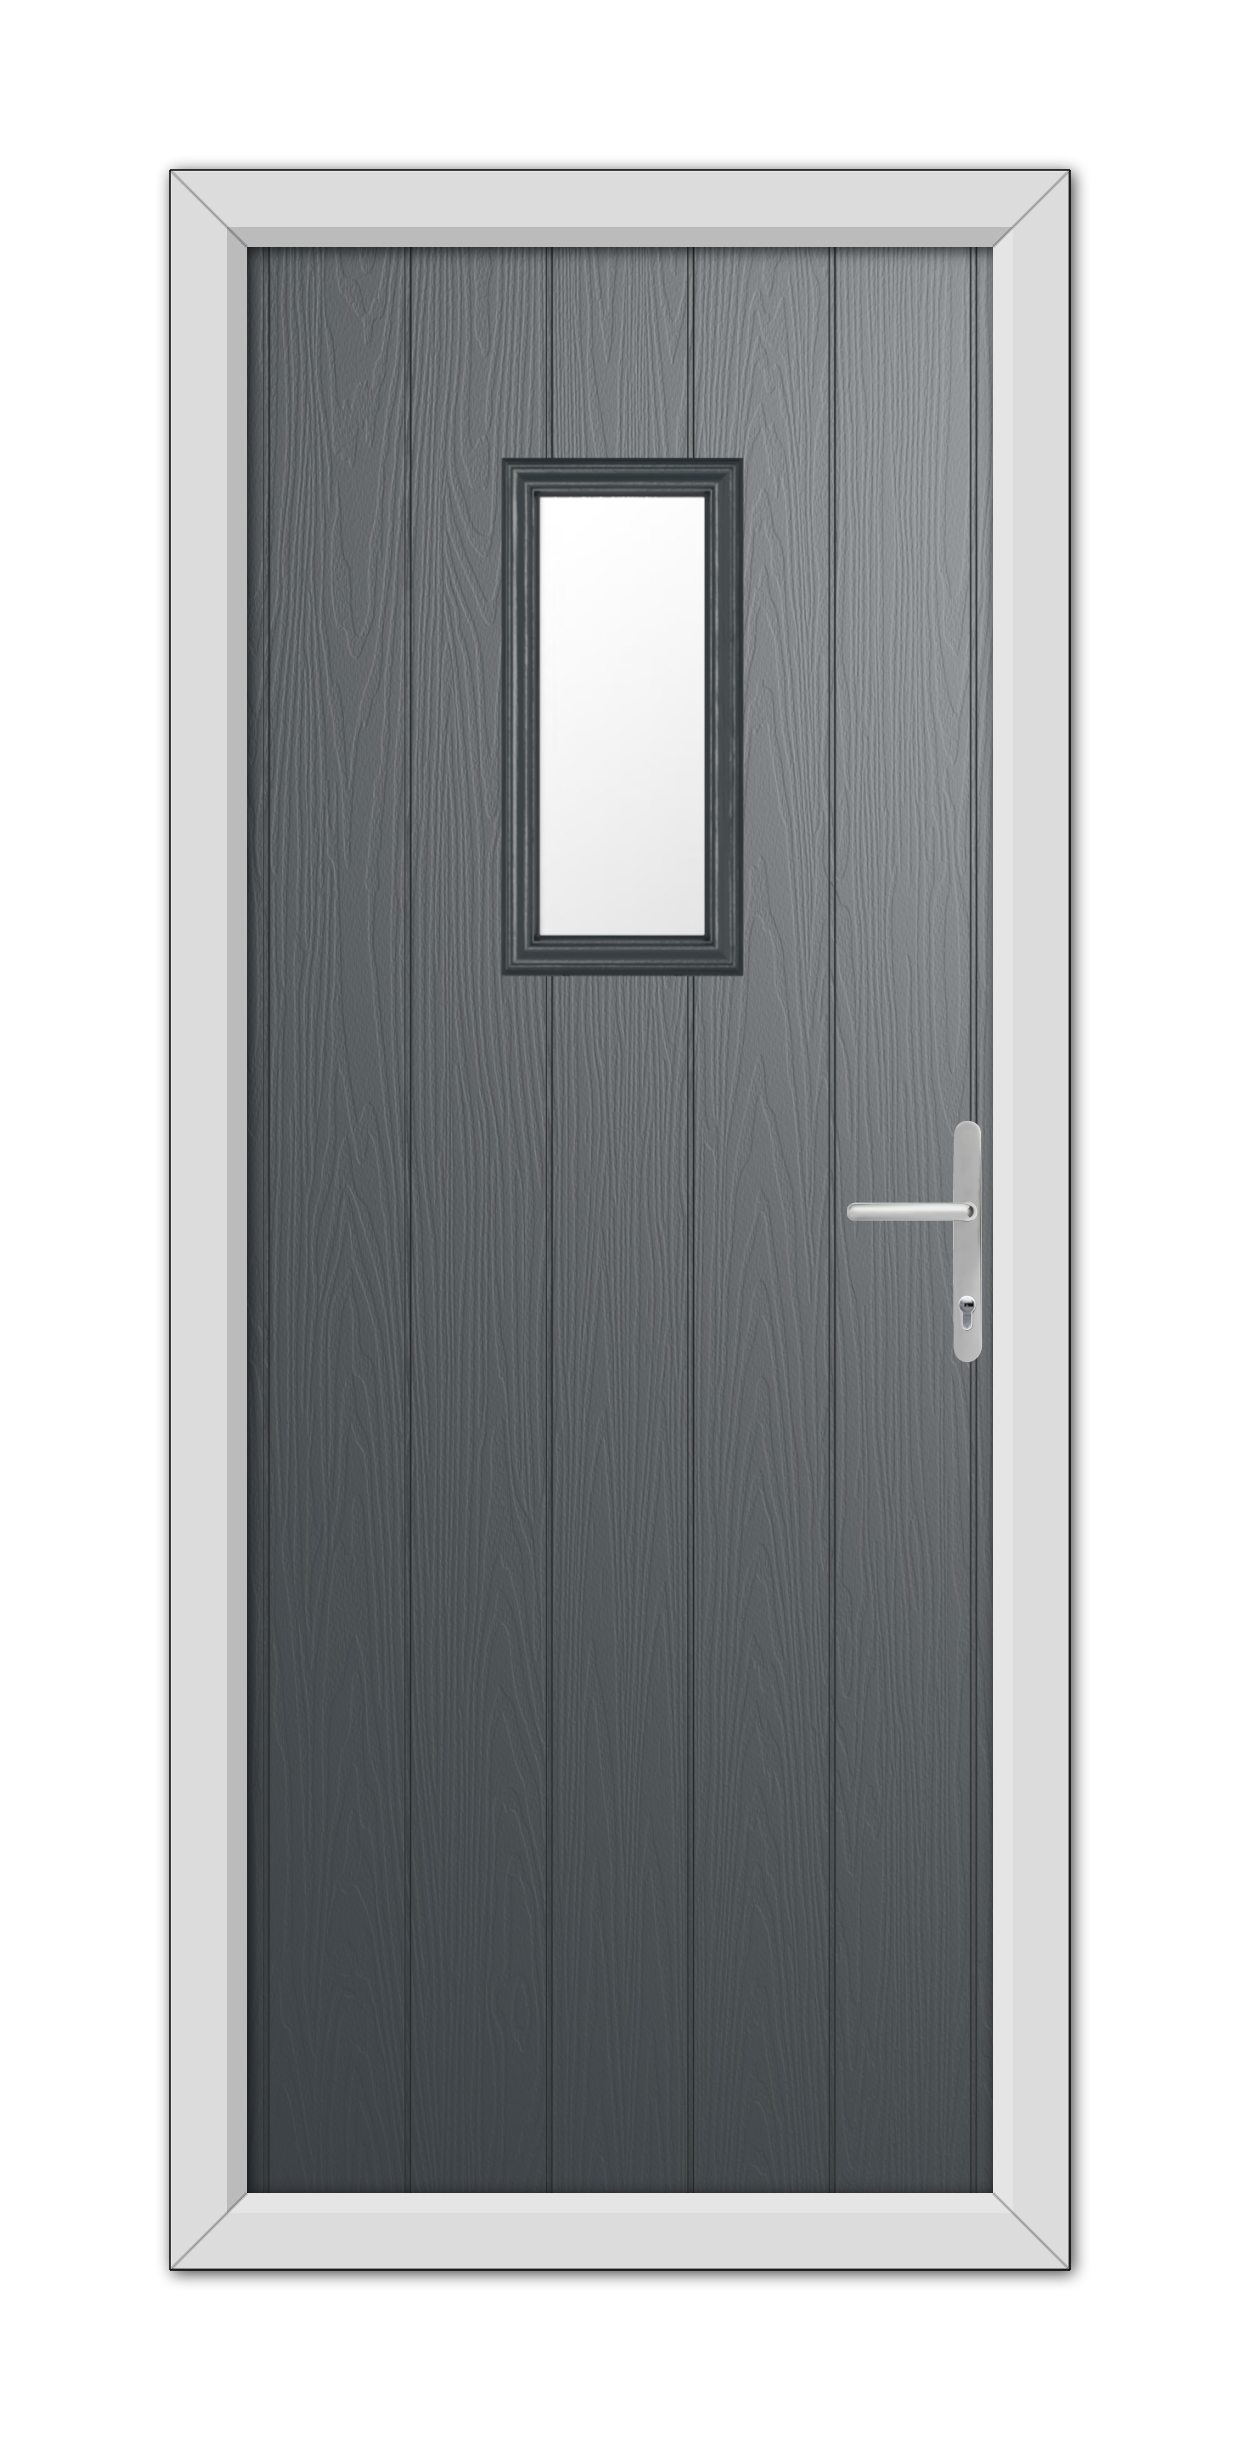 A modern Anthracite Grey Somerset Composite Door with a small square window and a silver handle, set within a white frame.